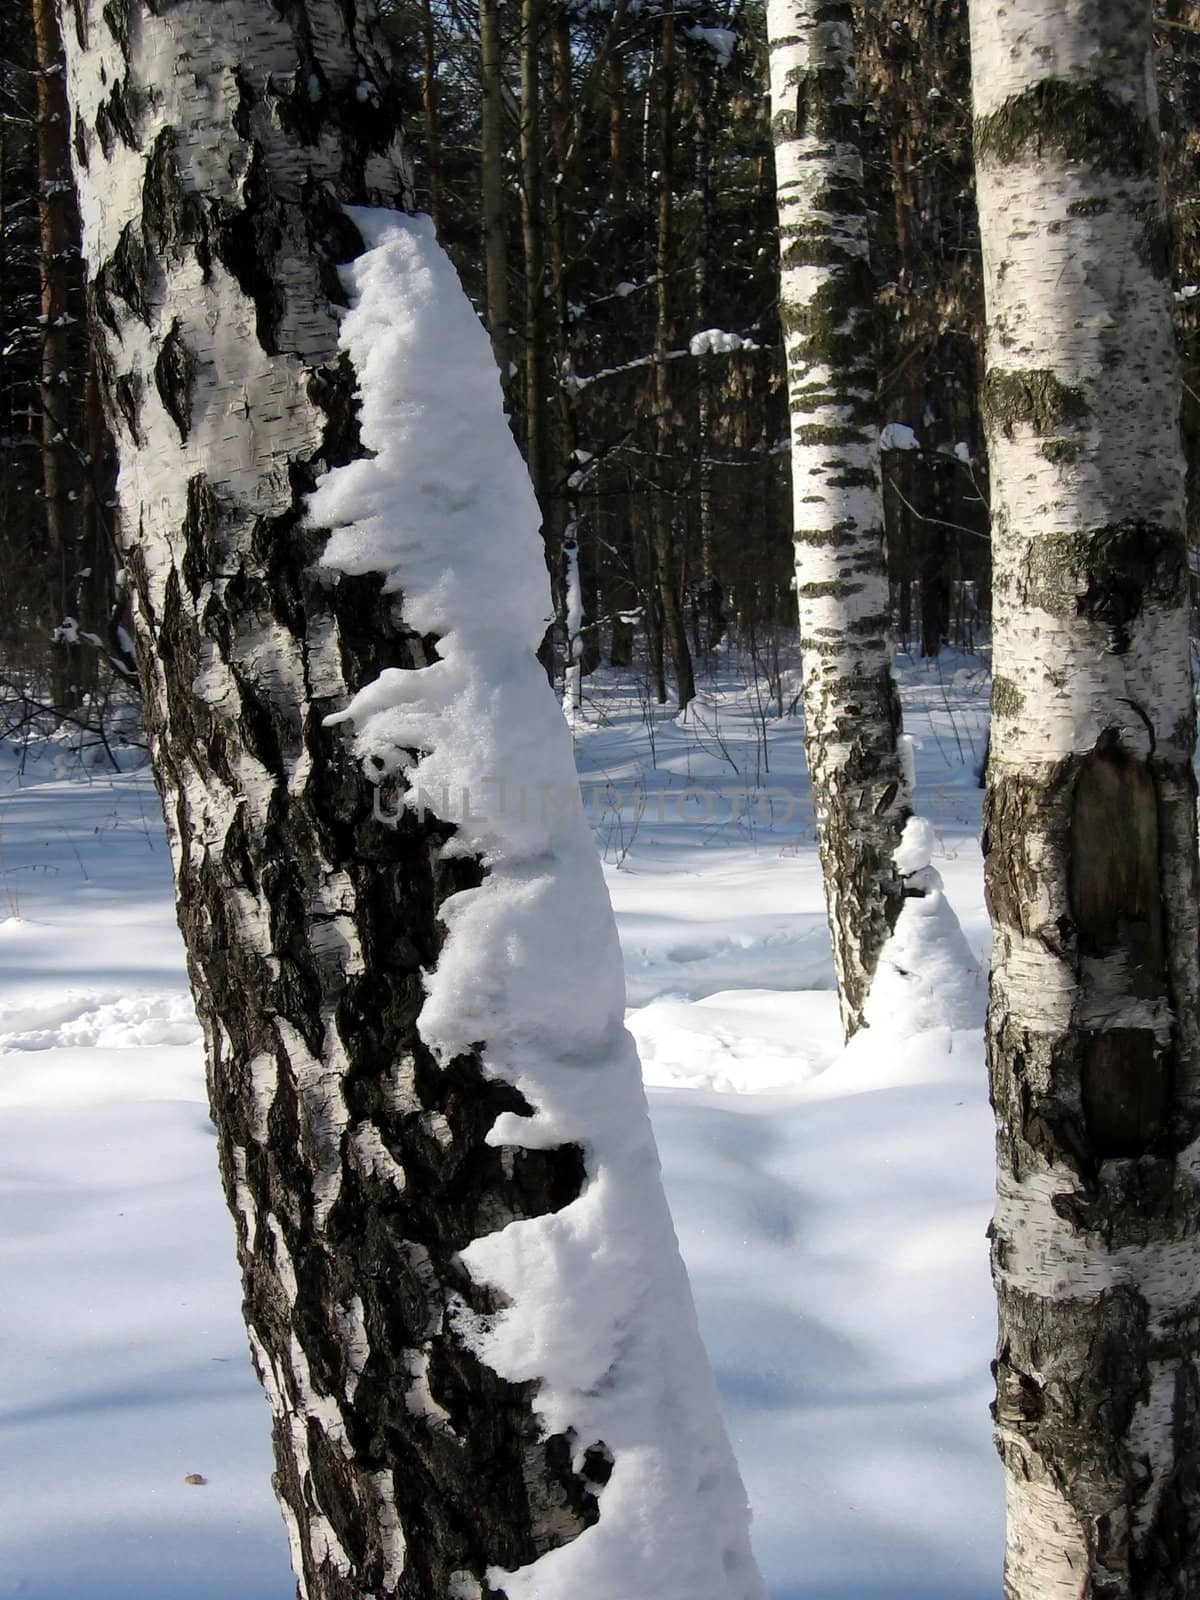 Birches in snow at the winter forest